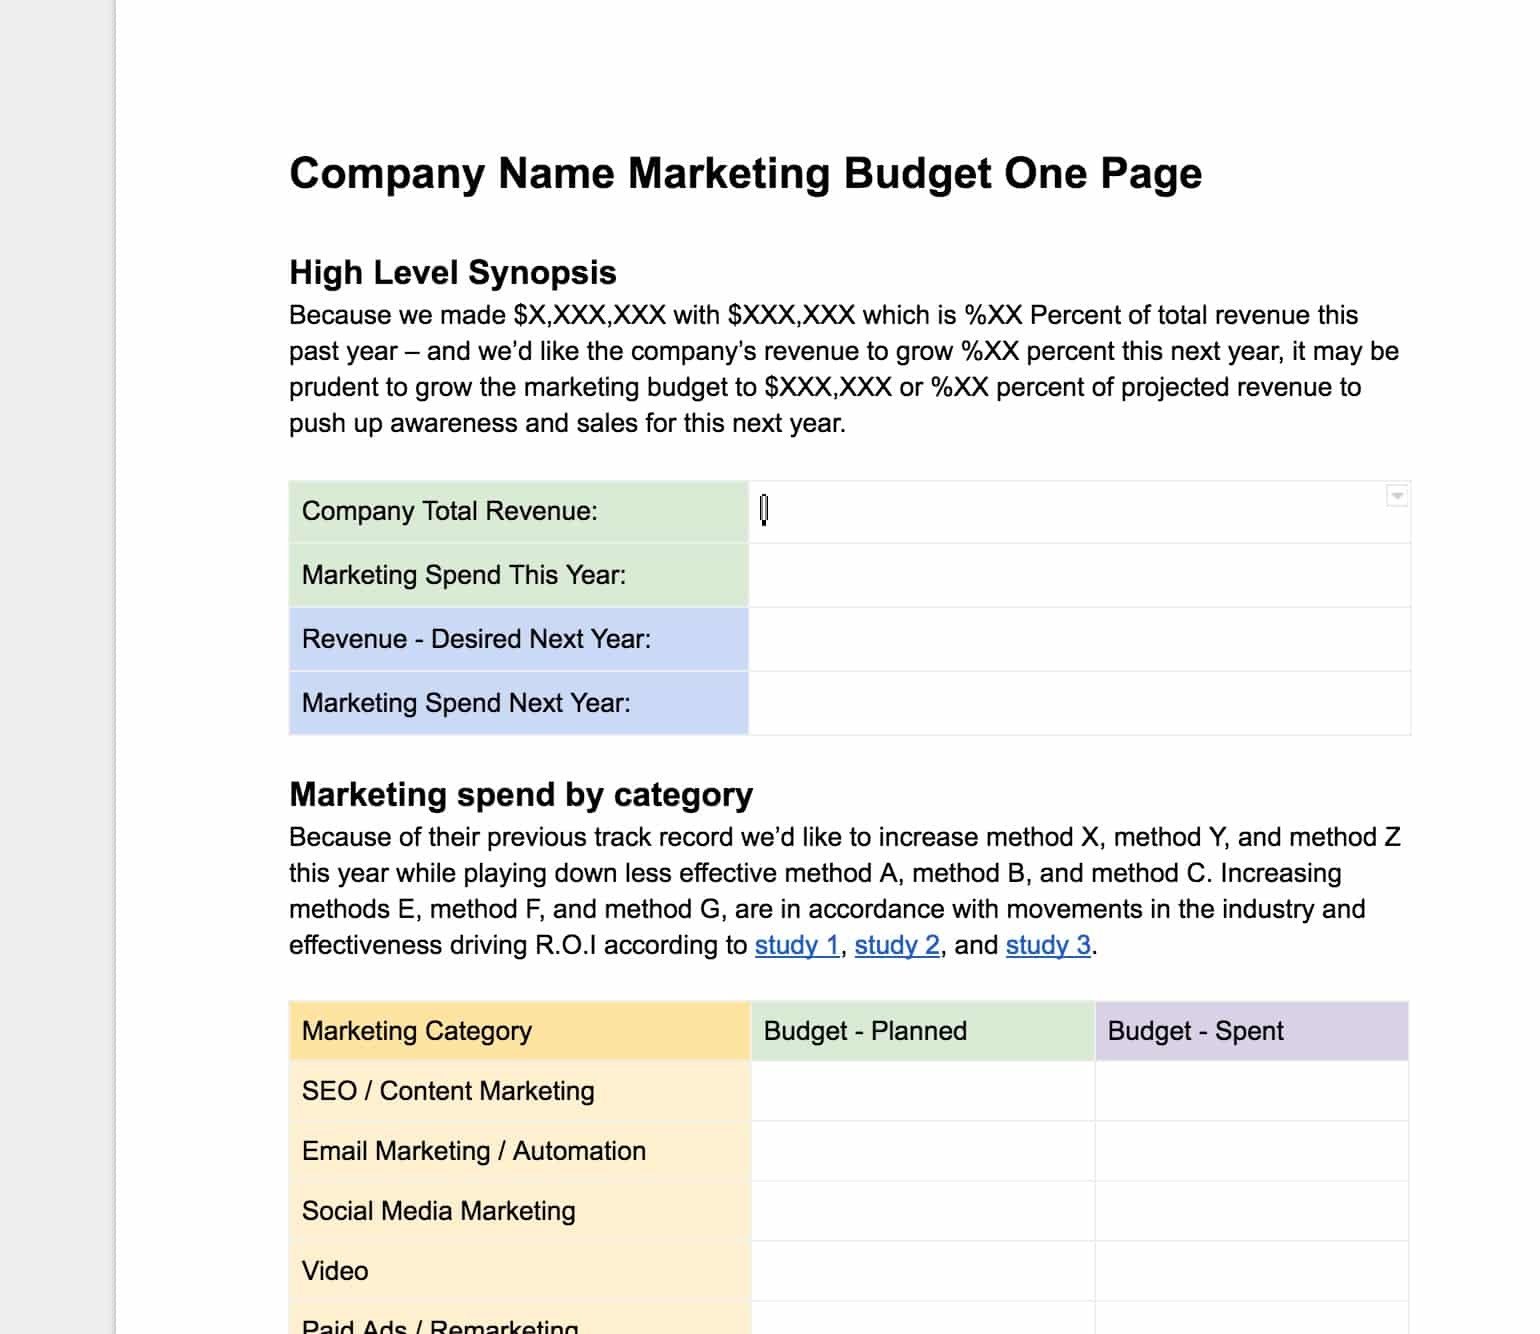 Easy Free Marketing Bud ing e Page Template